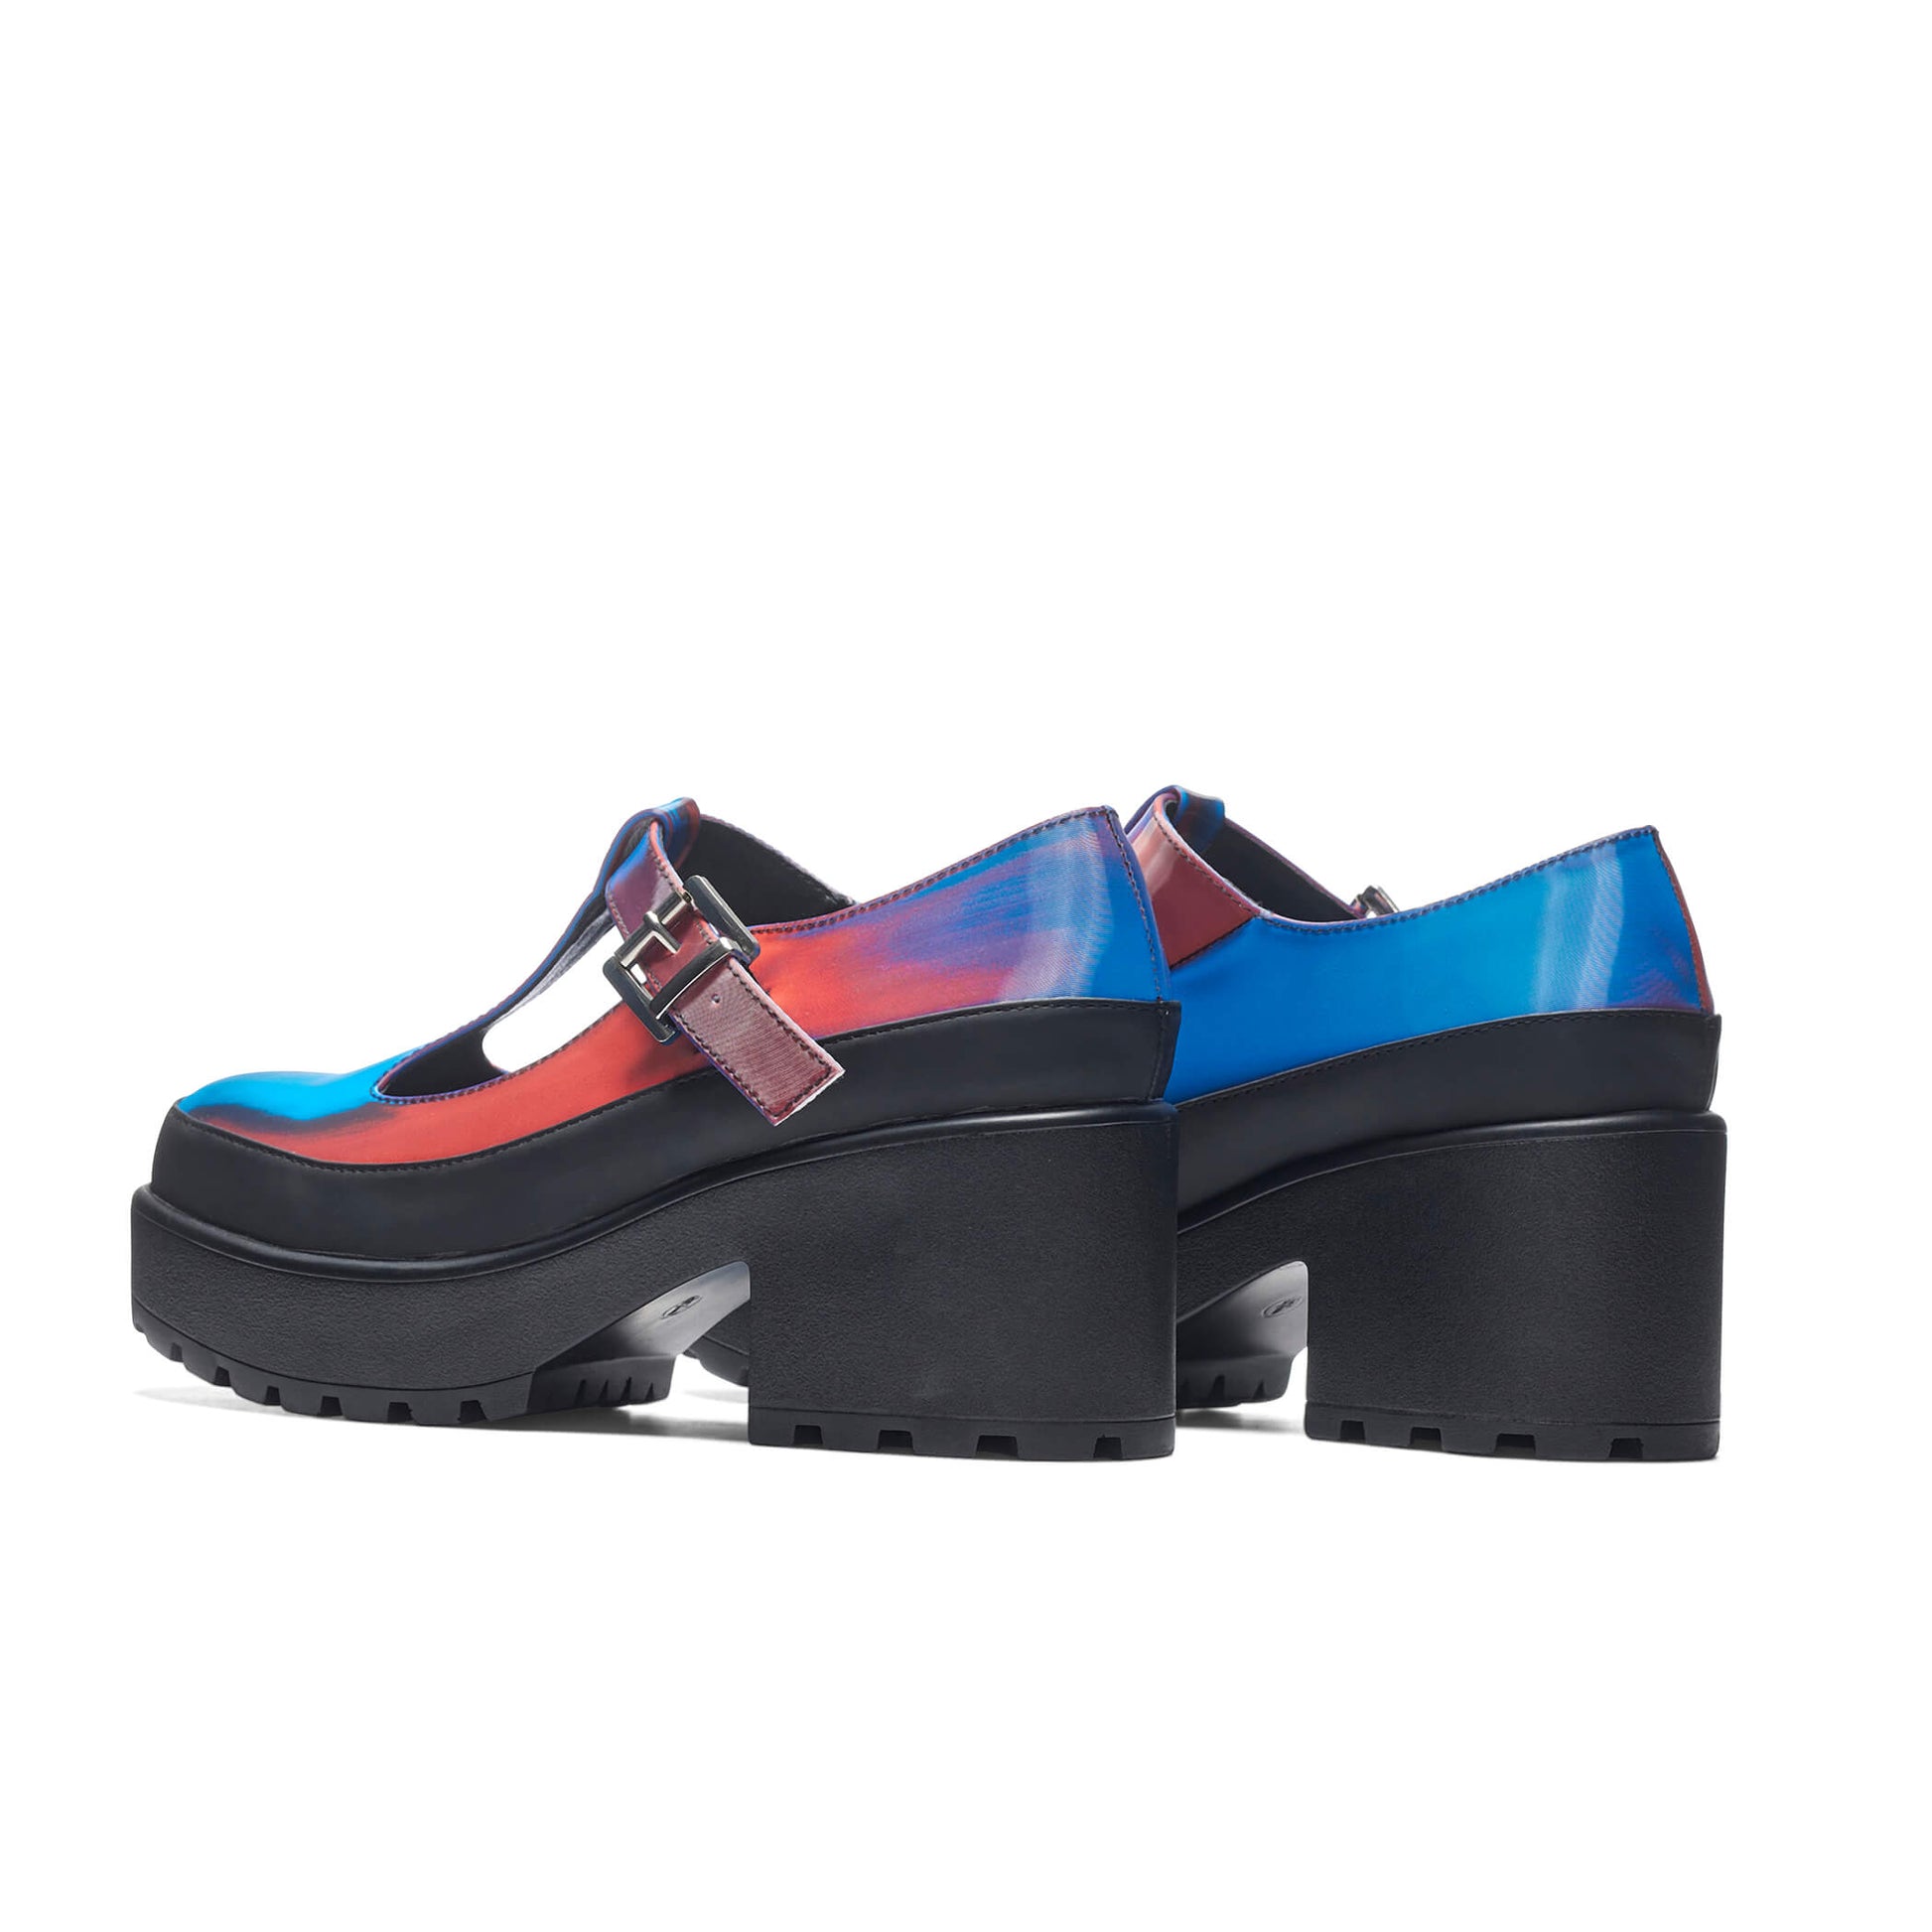 Sai Iridescent Mary Jane Shoes 'Soap Bubbles Edition' - Multi - KOI Footwear - Back View